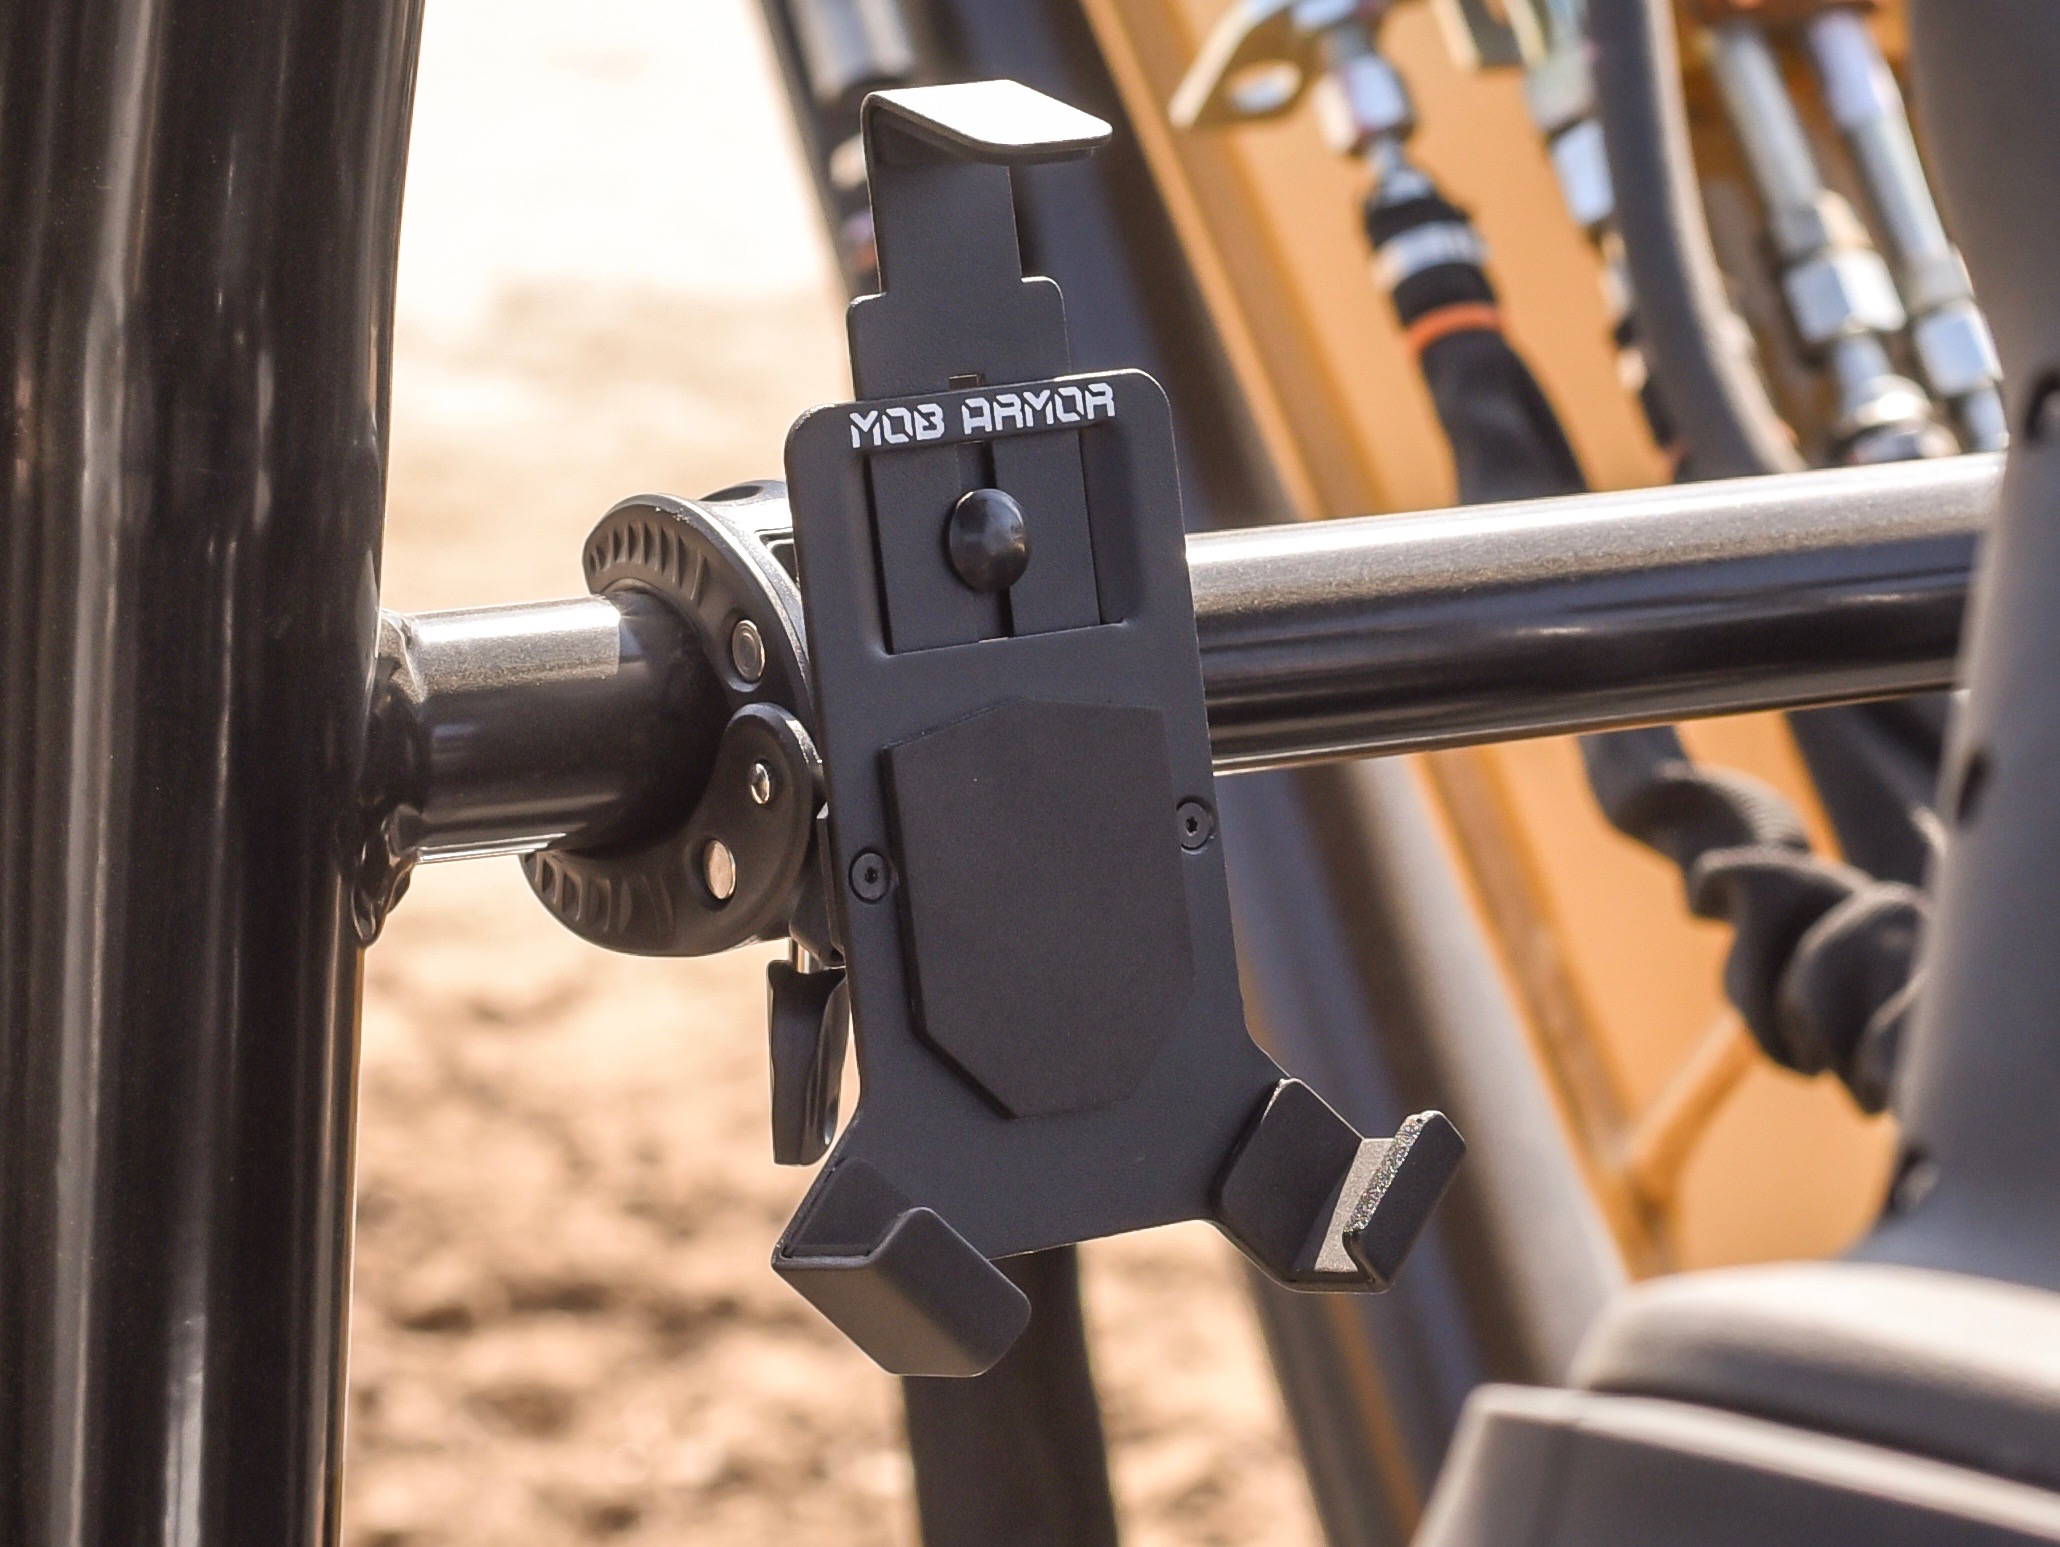 The Ultimate Grab Anything, Mount Anywhere Claw – Grabbing Off-Road enthusiasts and smartphones like nothing before it.